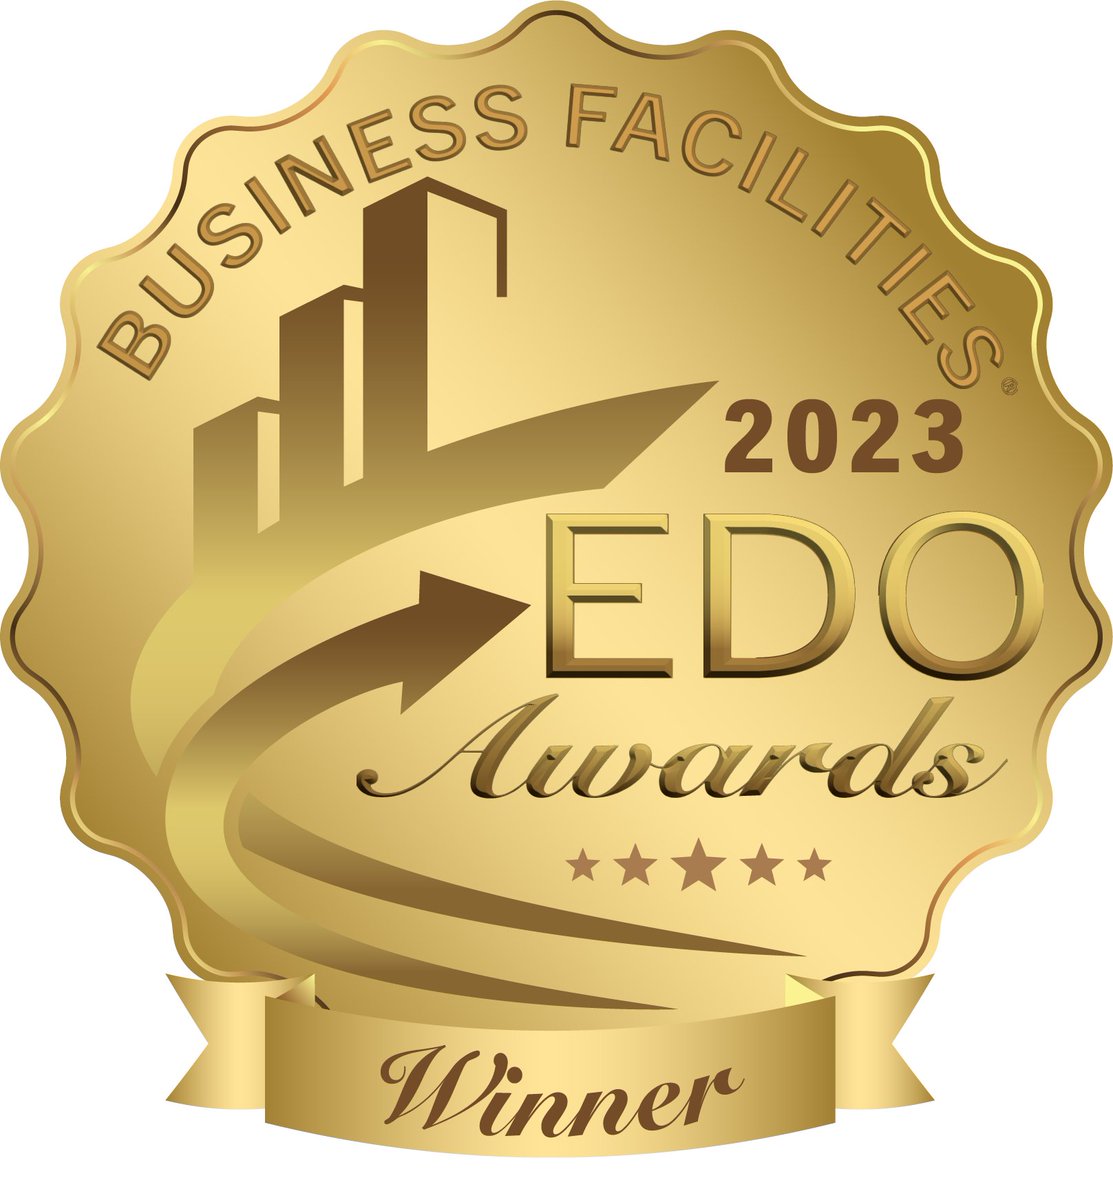 Pflugerville, Texas, has been recently awarded the prestigious Economic Development Organization (EDO) of the Year by Business Facilities! Read all about it here.bit.ly/3WiRgGS